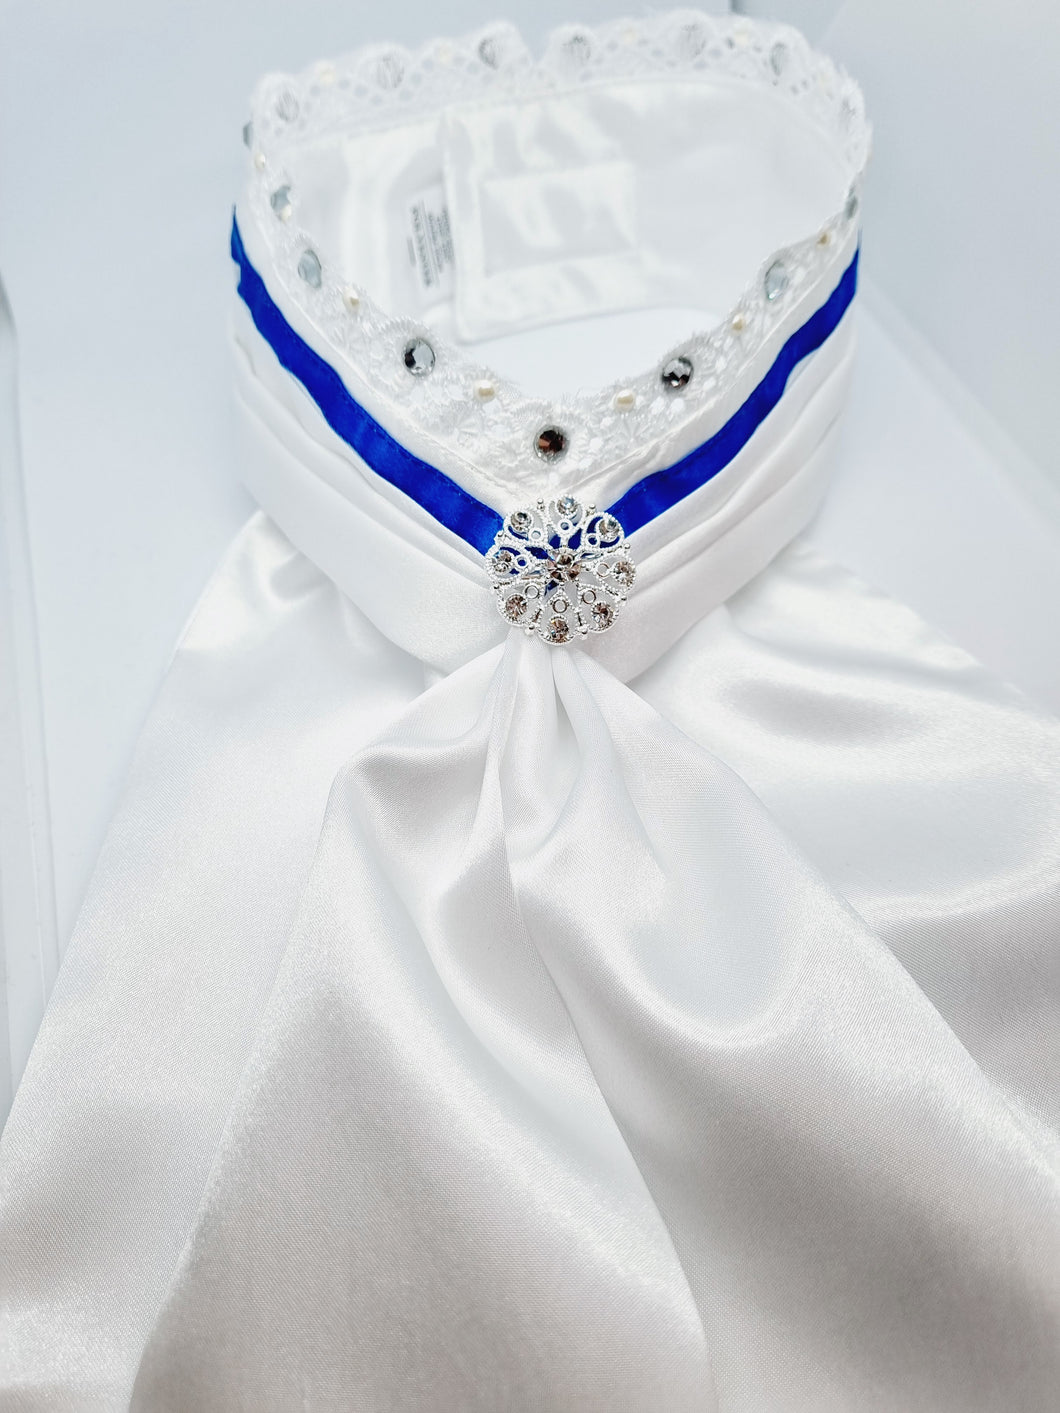 ERA EURO BELLE with PEARLS & CRYSTALS Stock Tie - White lustre satin with Royal blue trim, lace frill, pearl & crystal trim and brooch